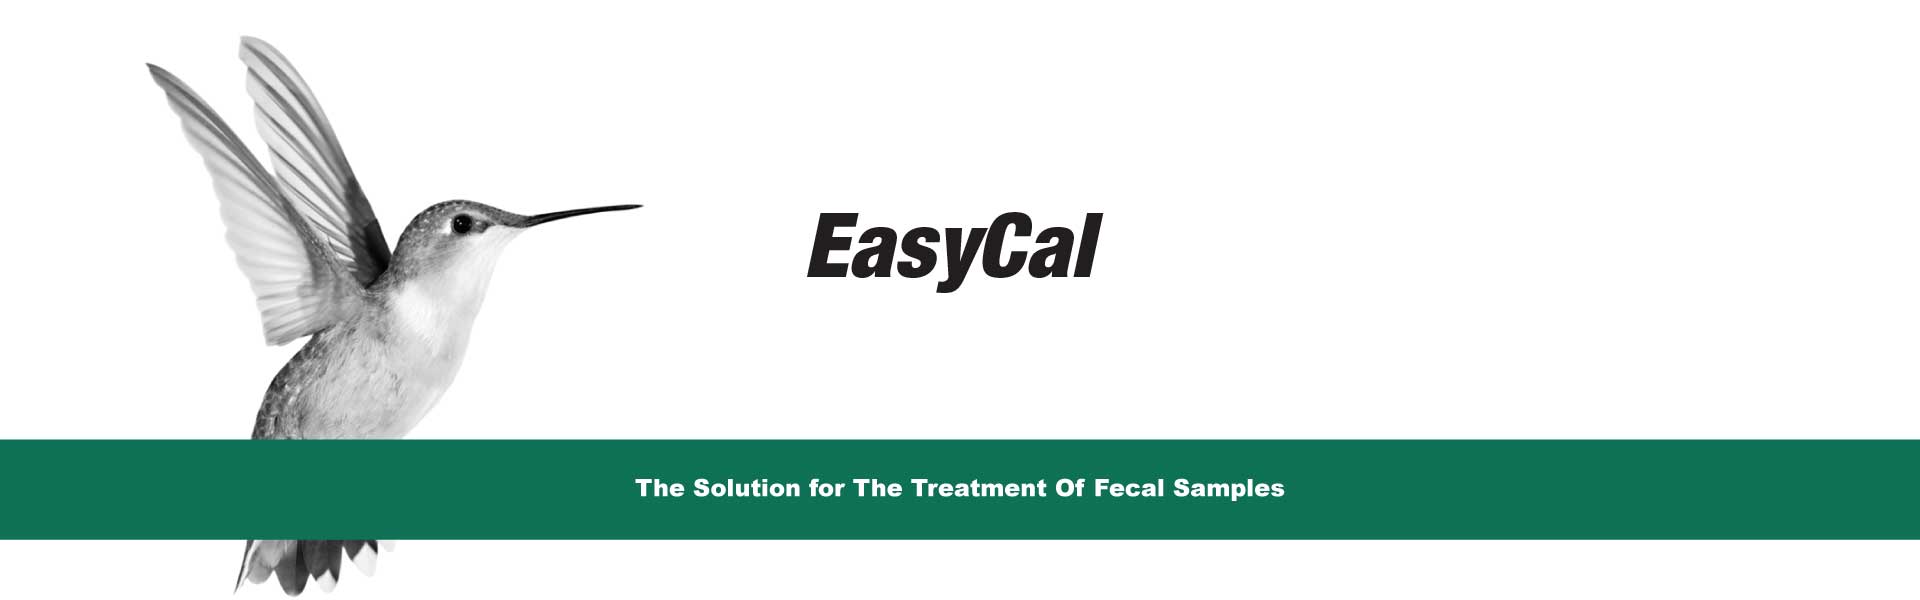 EasyCal is the most advanced and precise device to collect repeatable amounts of feces